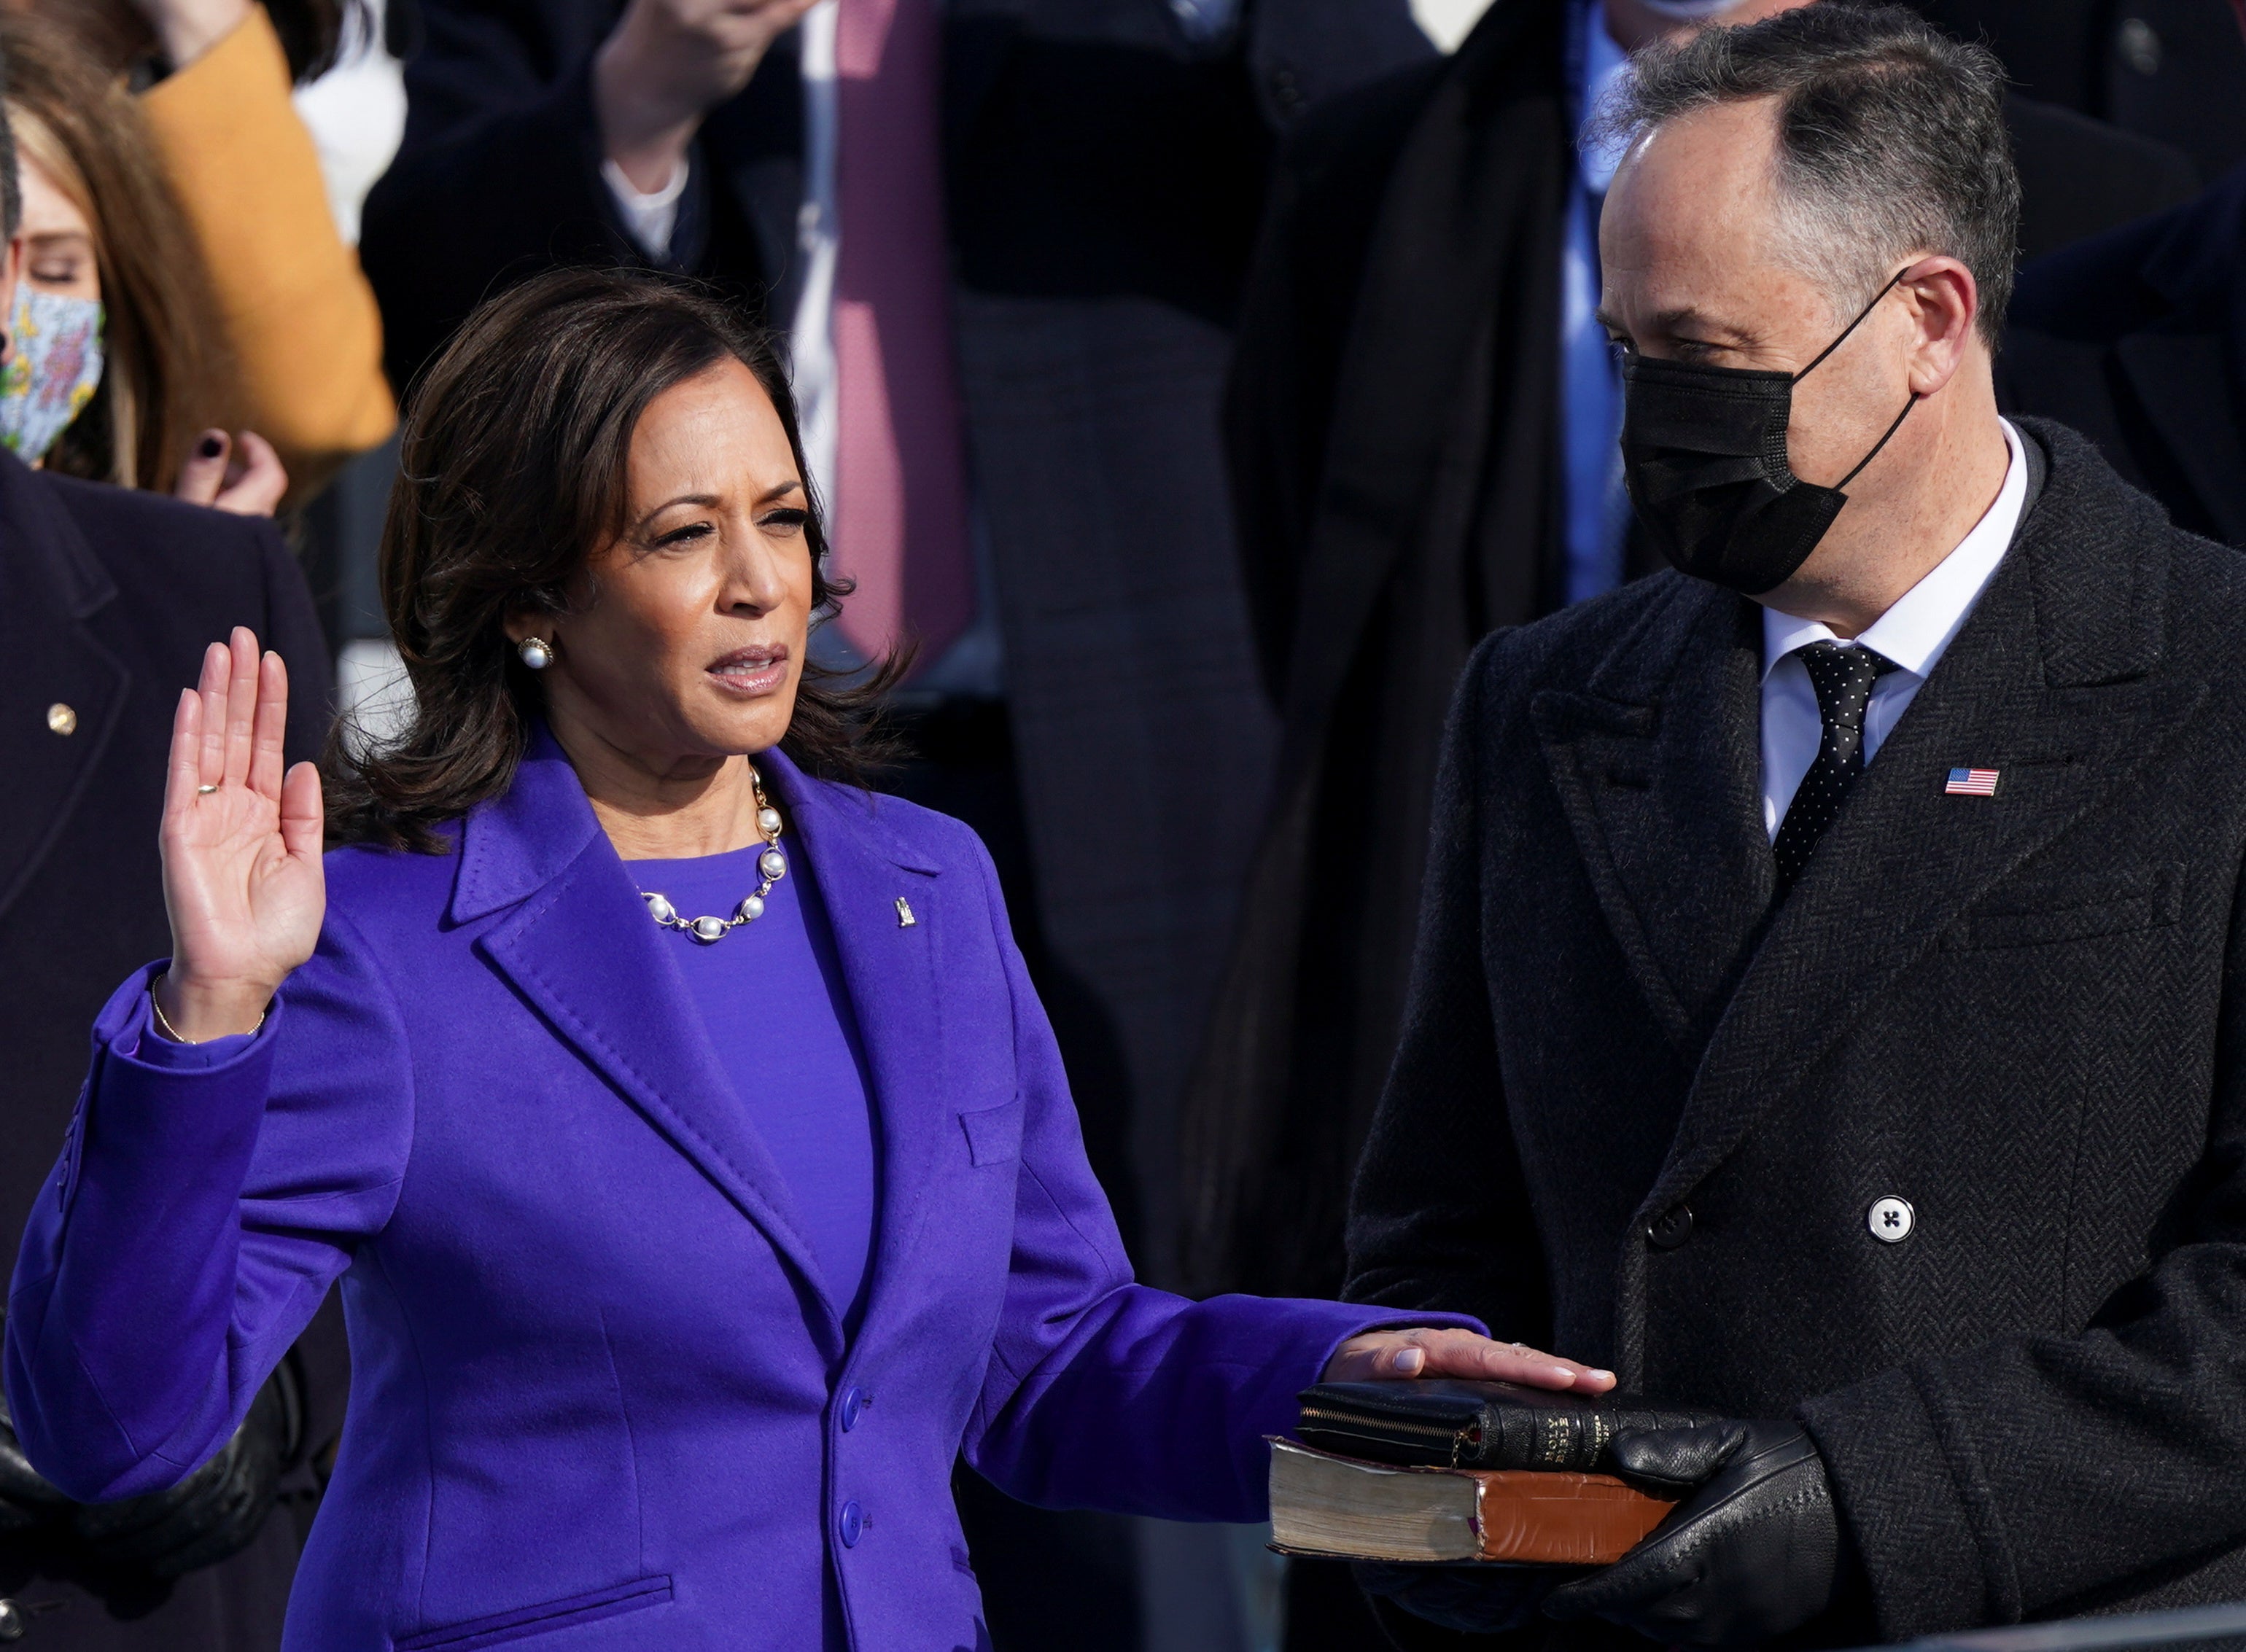 Harris is sworn in at the presidential inauguration on Wednesday